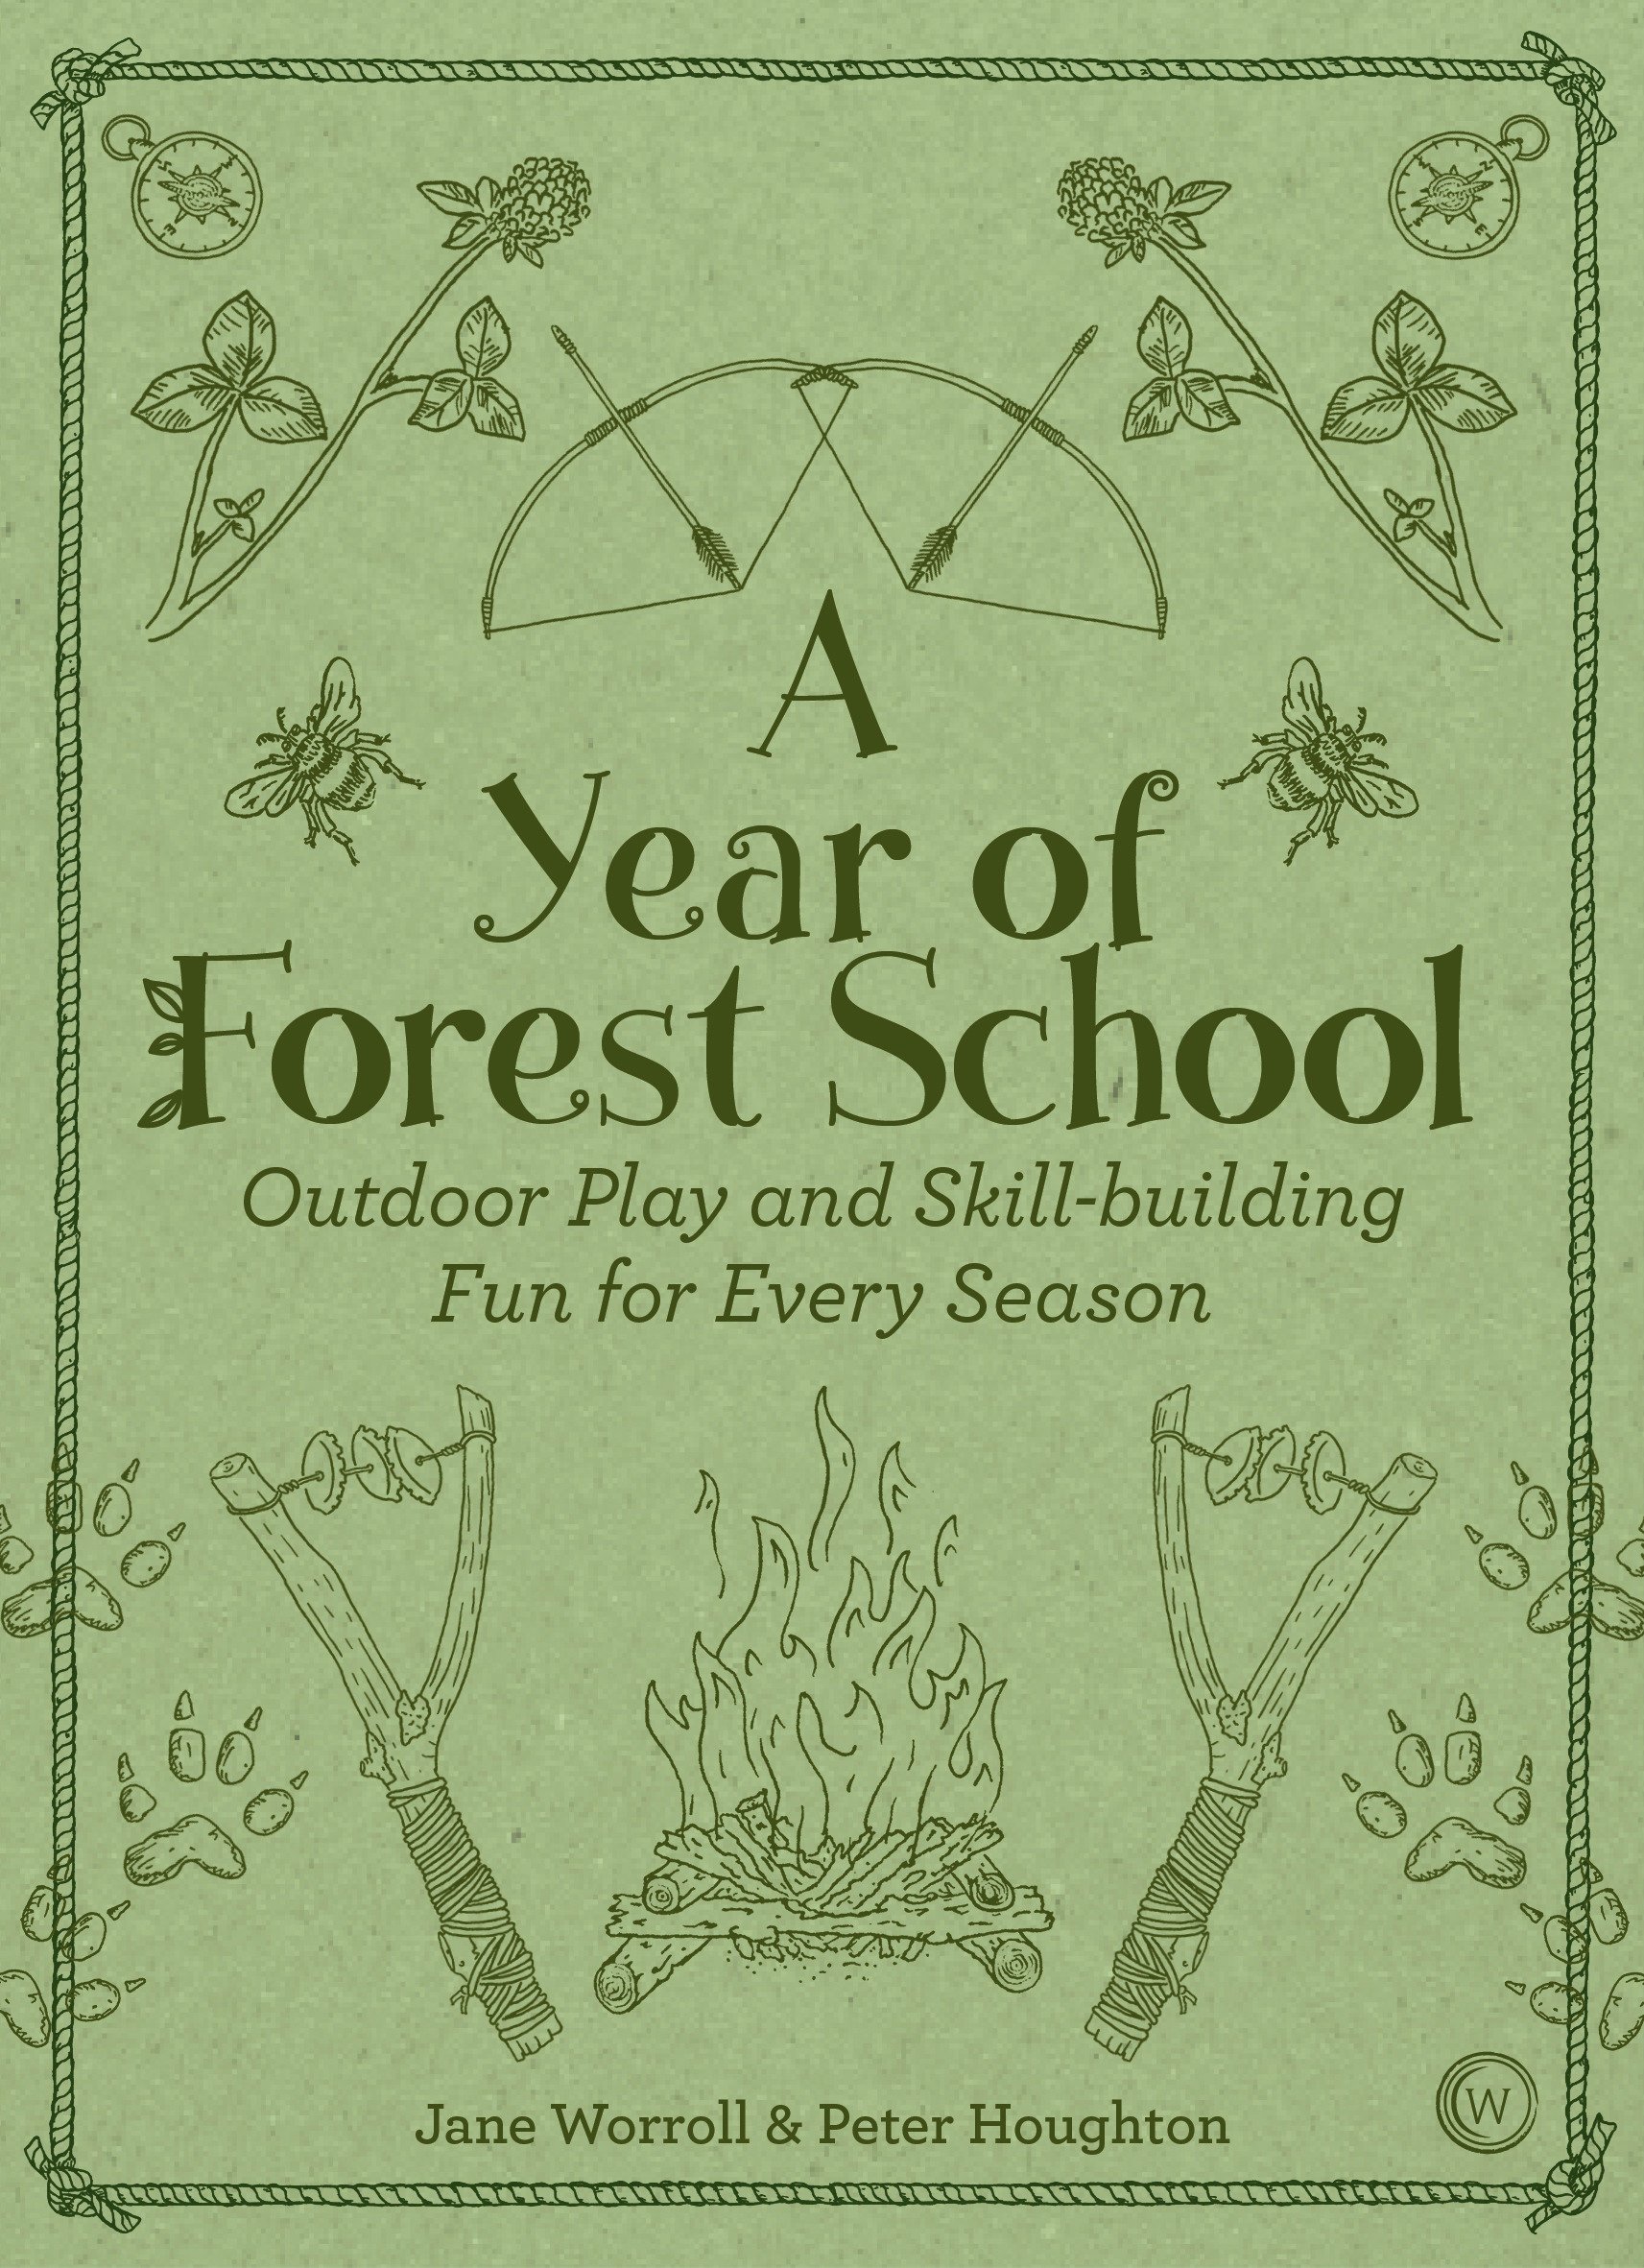 A Year of Forest School | Jane Worroll, Peter Houghton